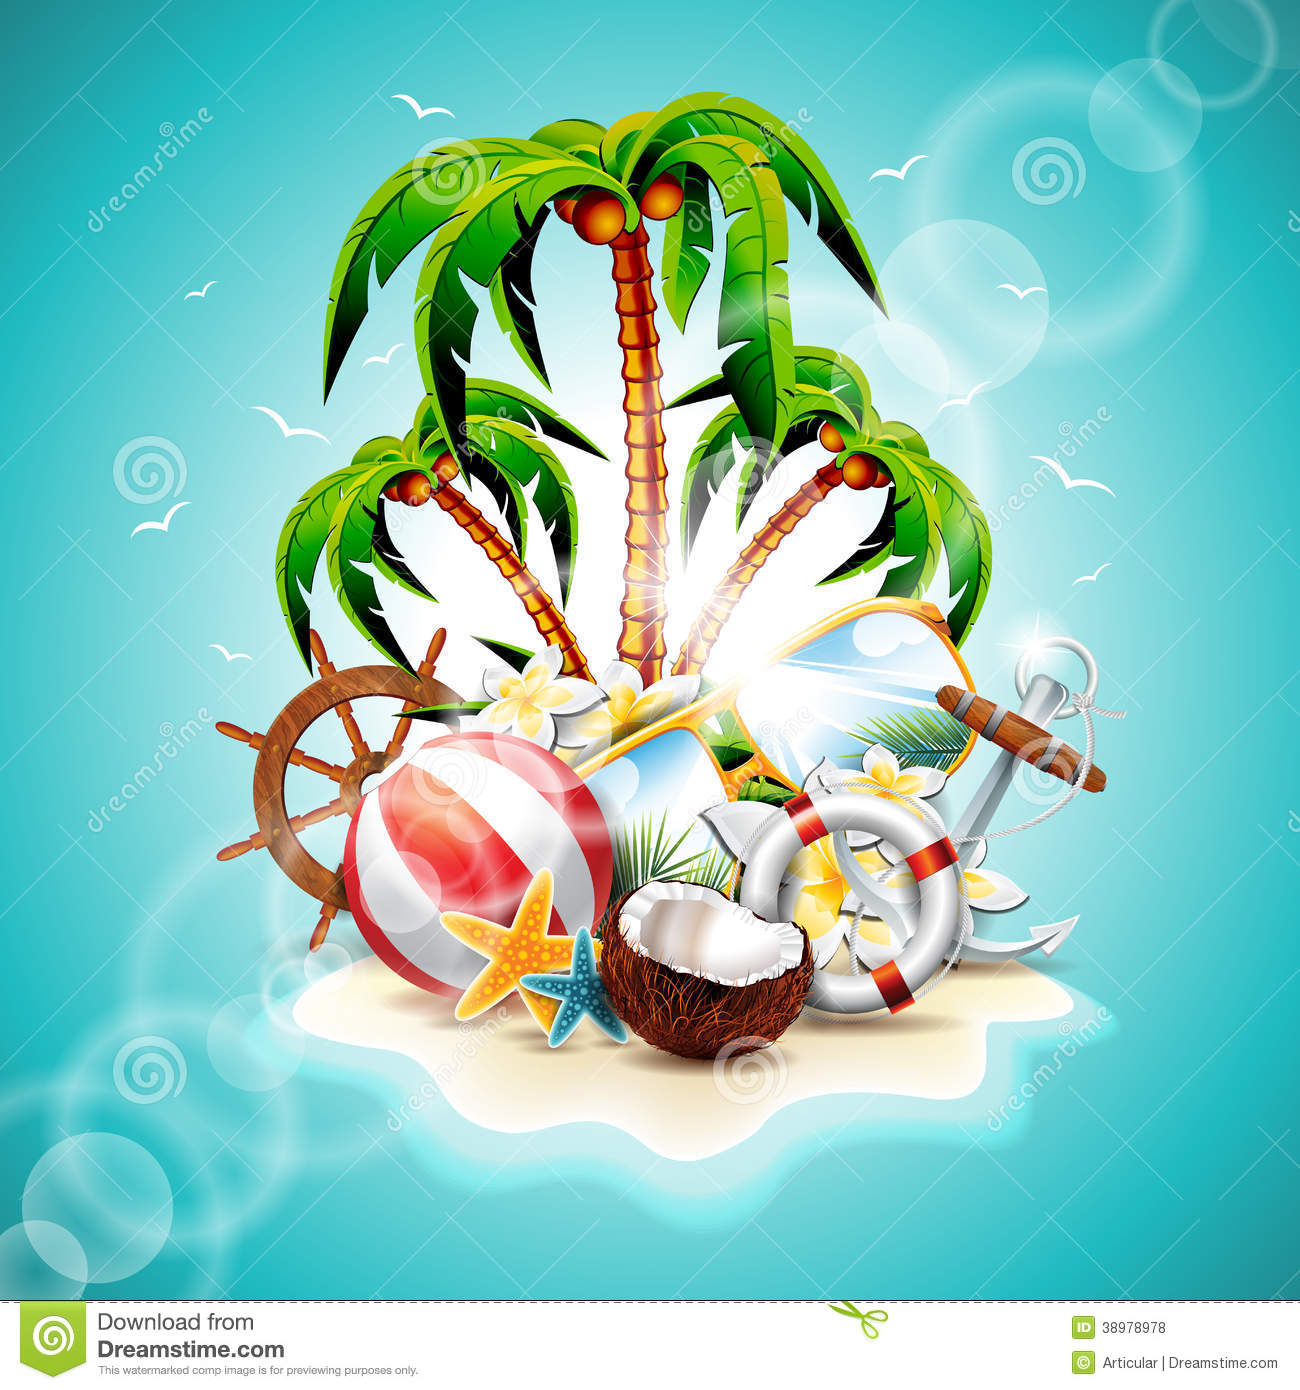 Vector Illustration On A Summer Holiday Theme With Paradise Island On